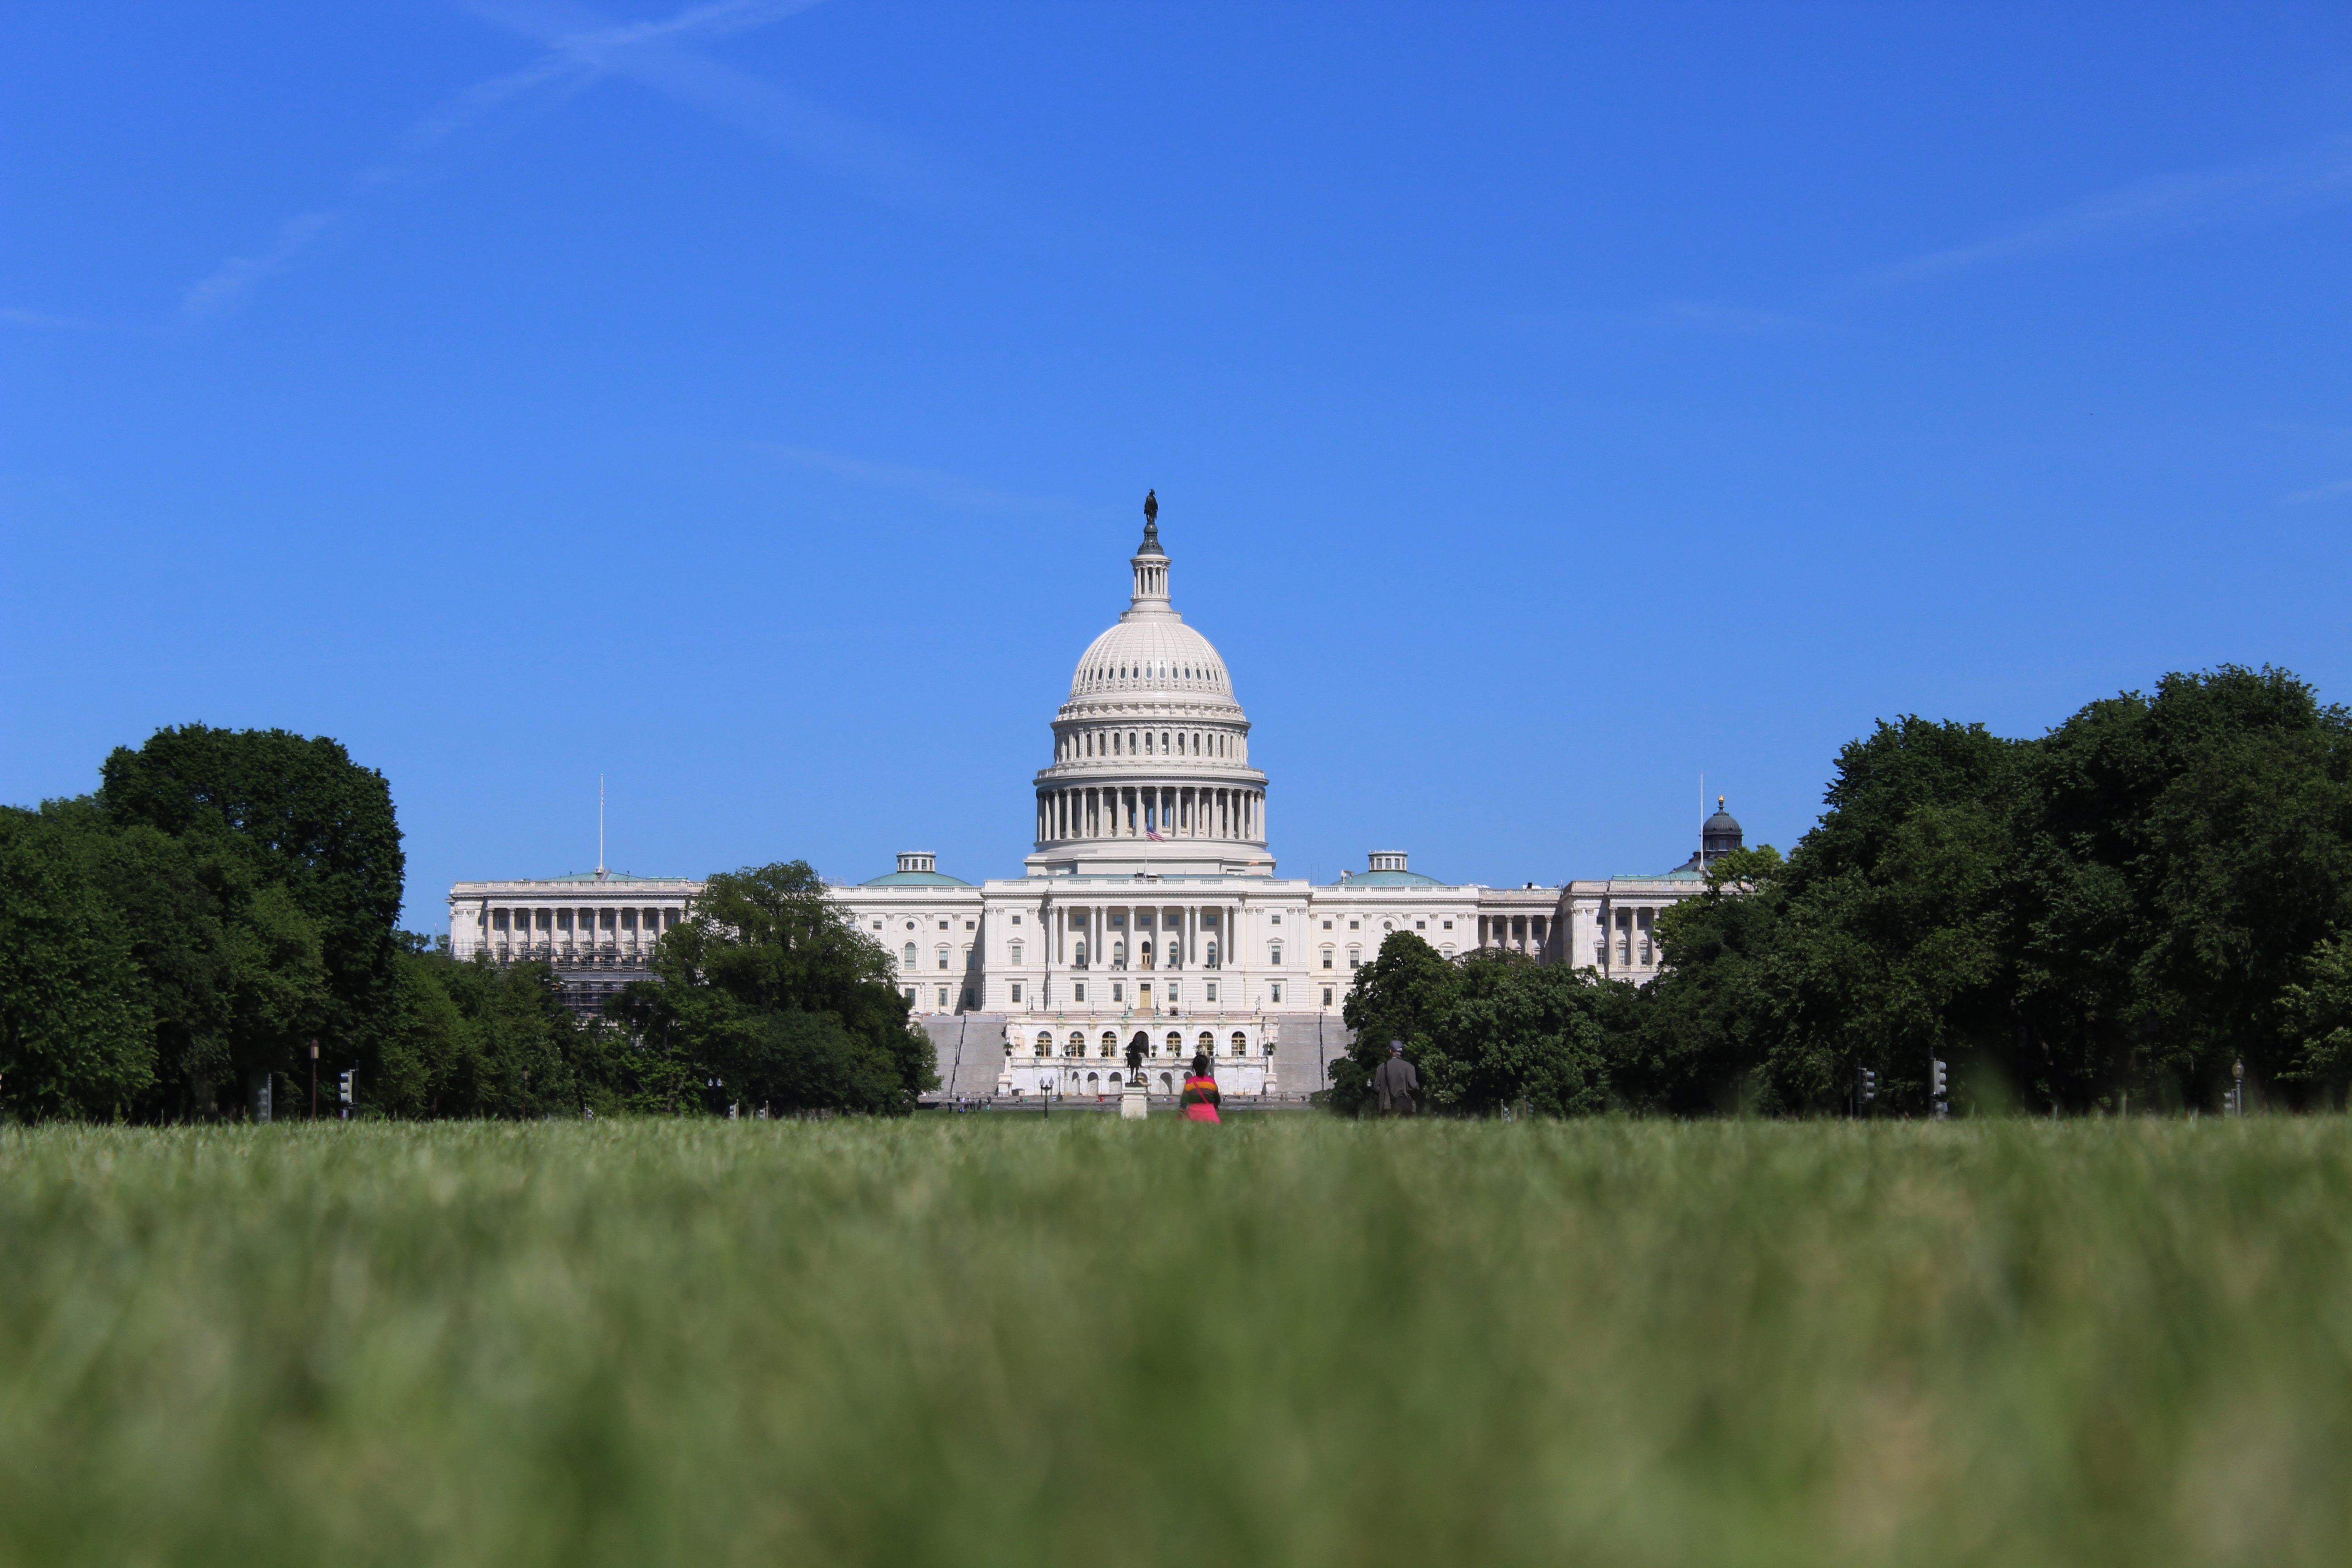 A picture of the United States Capitol Building in Washington, DC